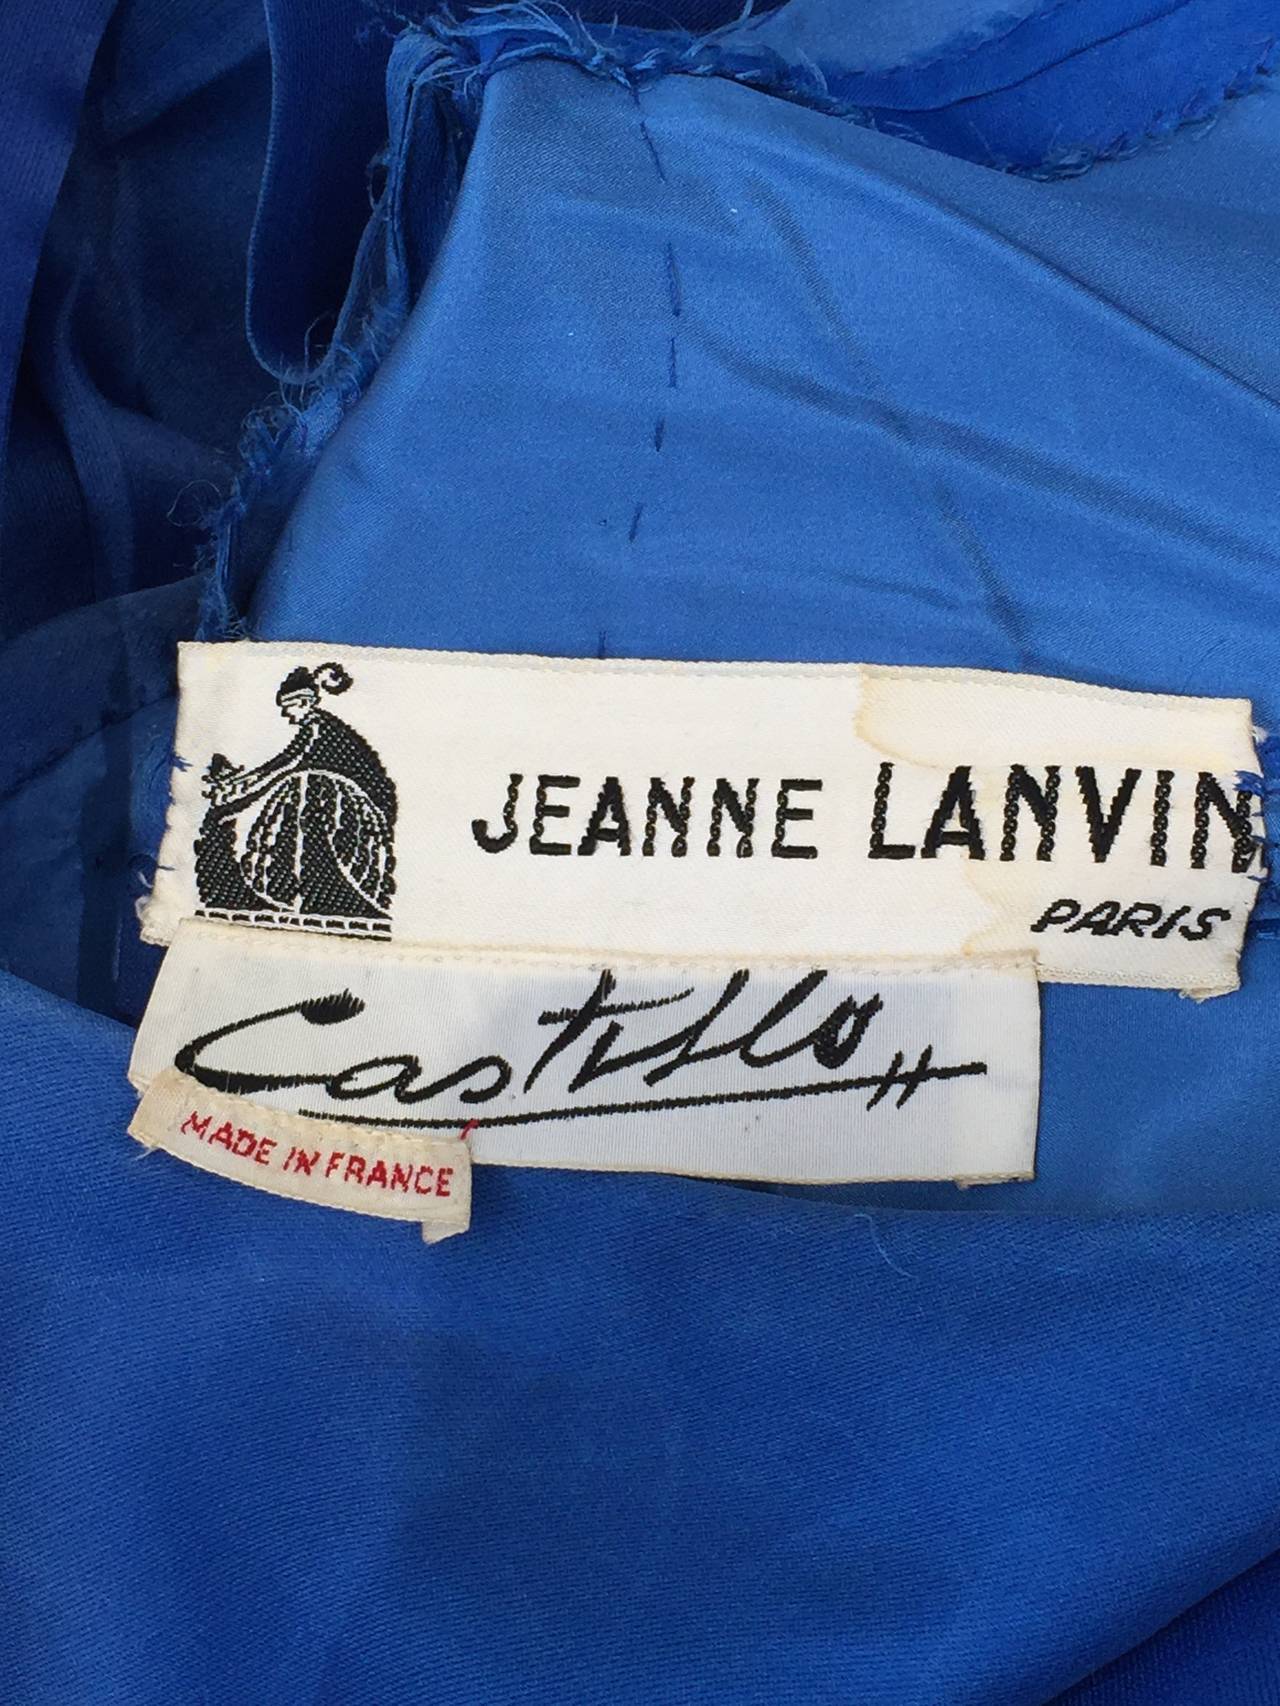 1950's royal blue silk organza gown from Lanvin, Haute Couture. This
bears the famous Lanvin / Castillo label. With its full skirt and unusual
one shouldered look, this dress is totally modern.  Great addition to Museum or collector!
Condition : see